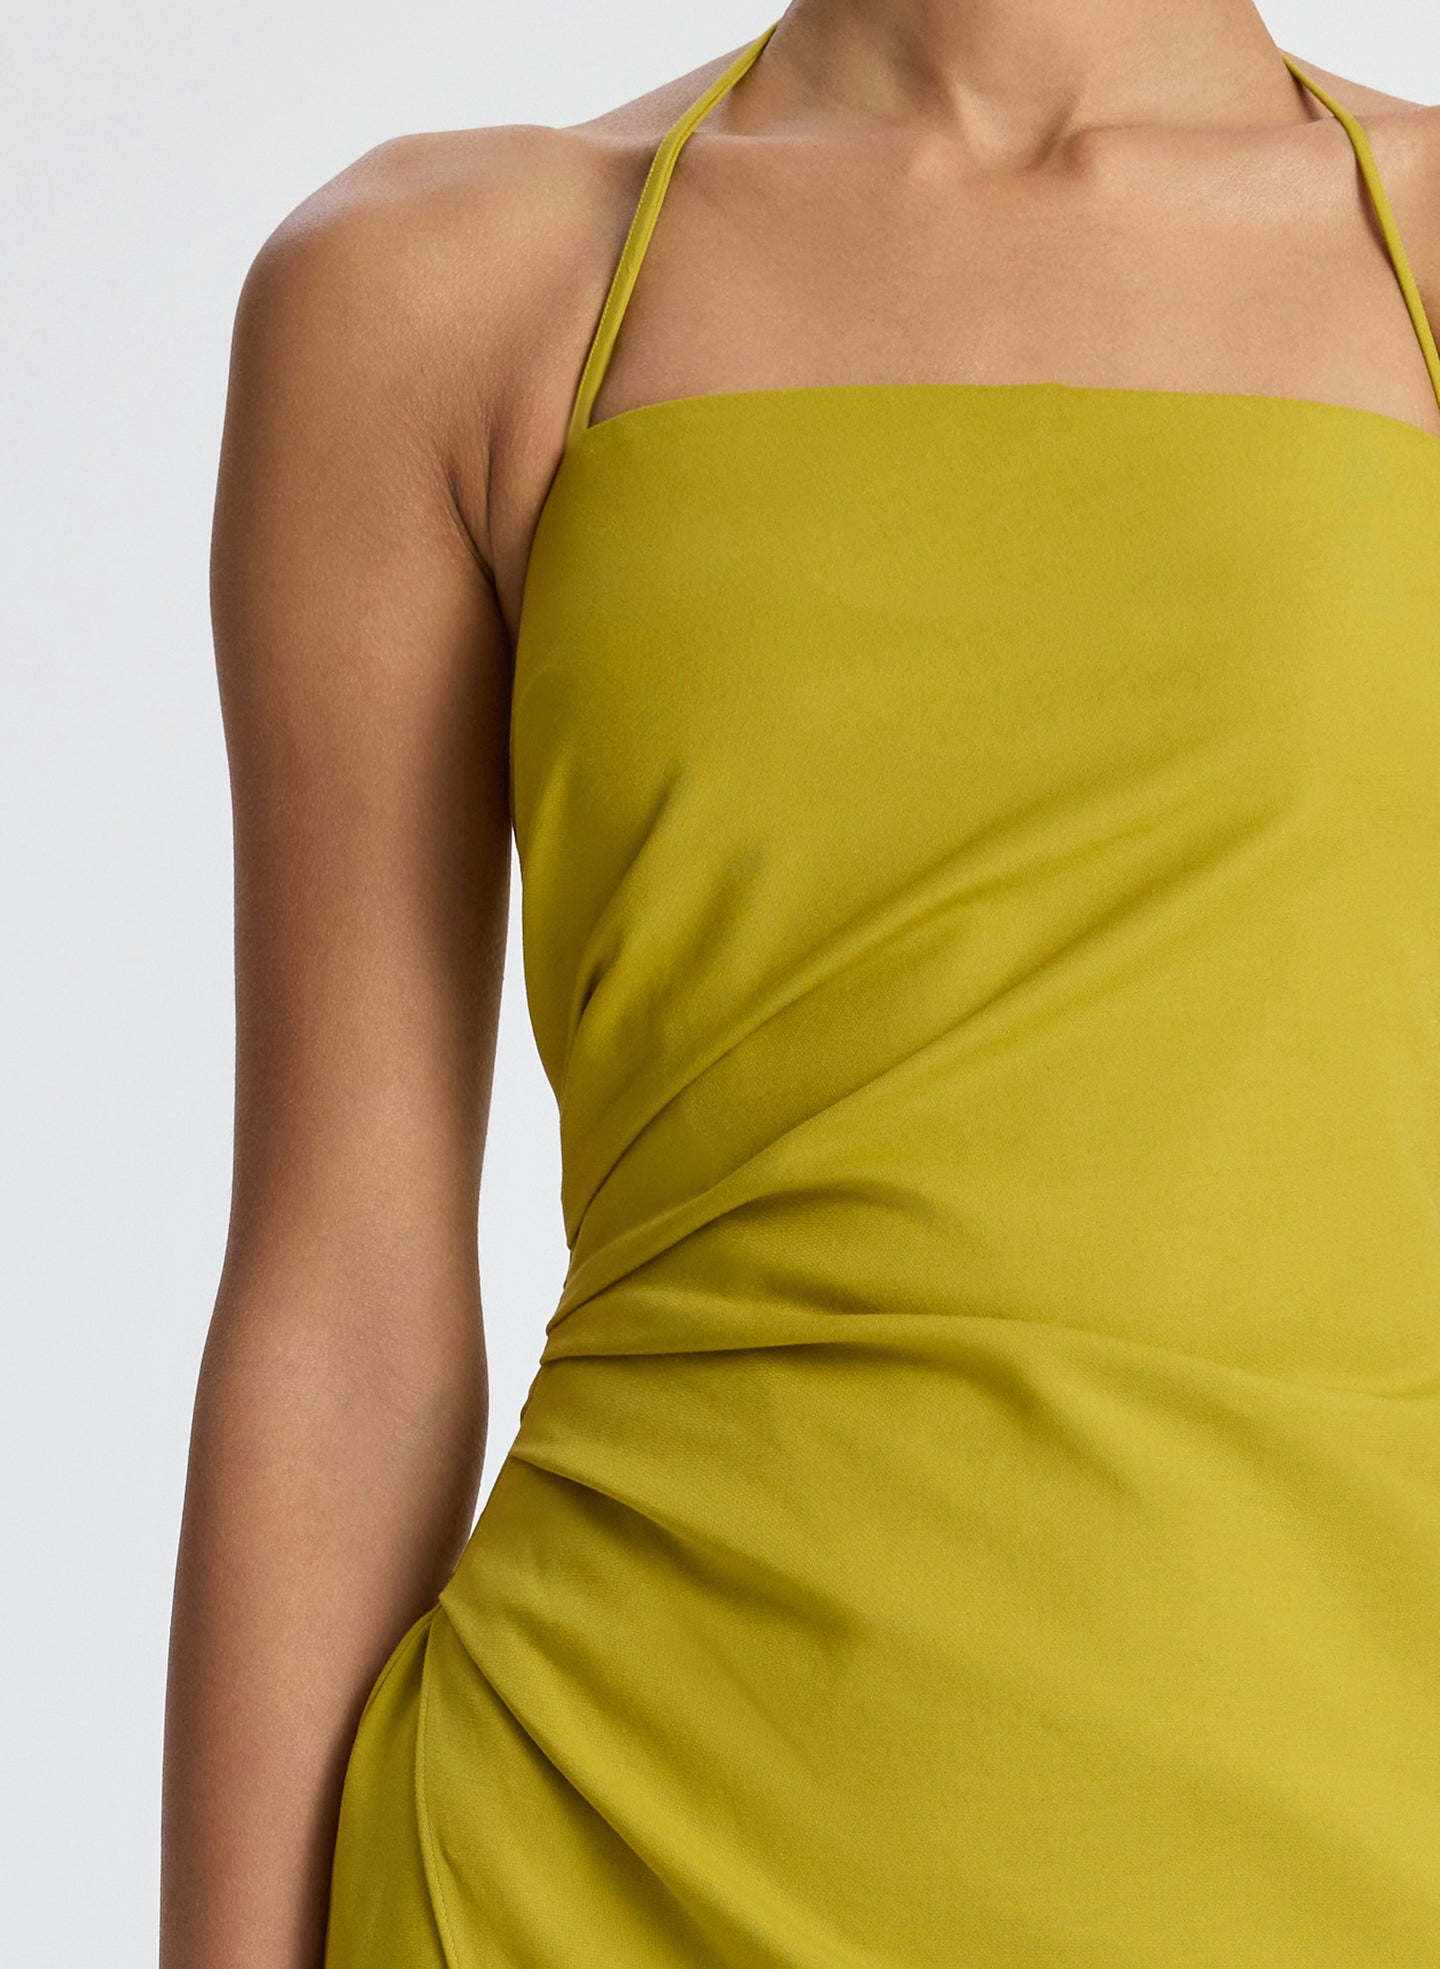 detail view of woman wearing yellow halter neckline ruched midi dress